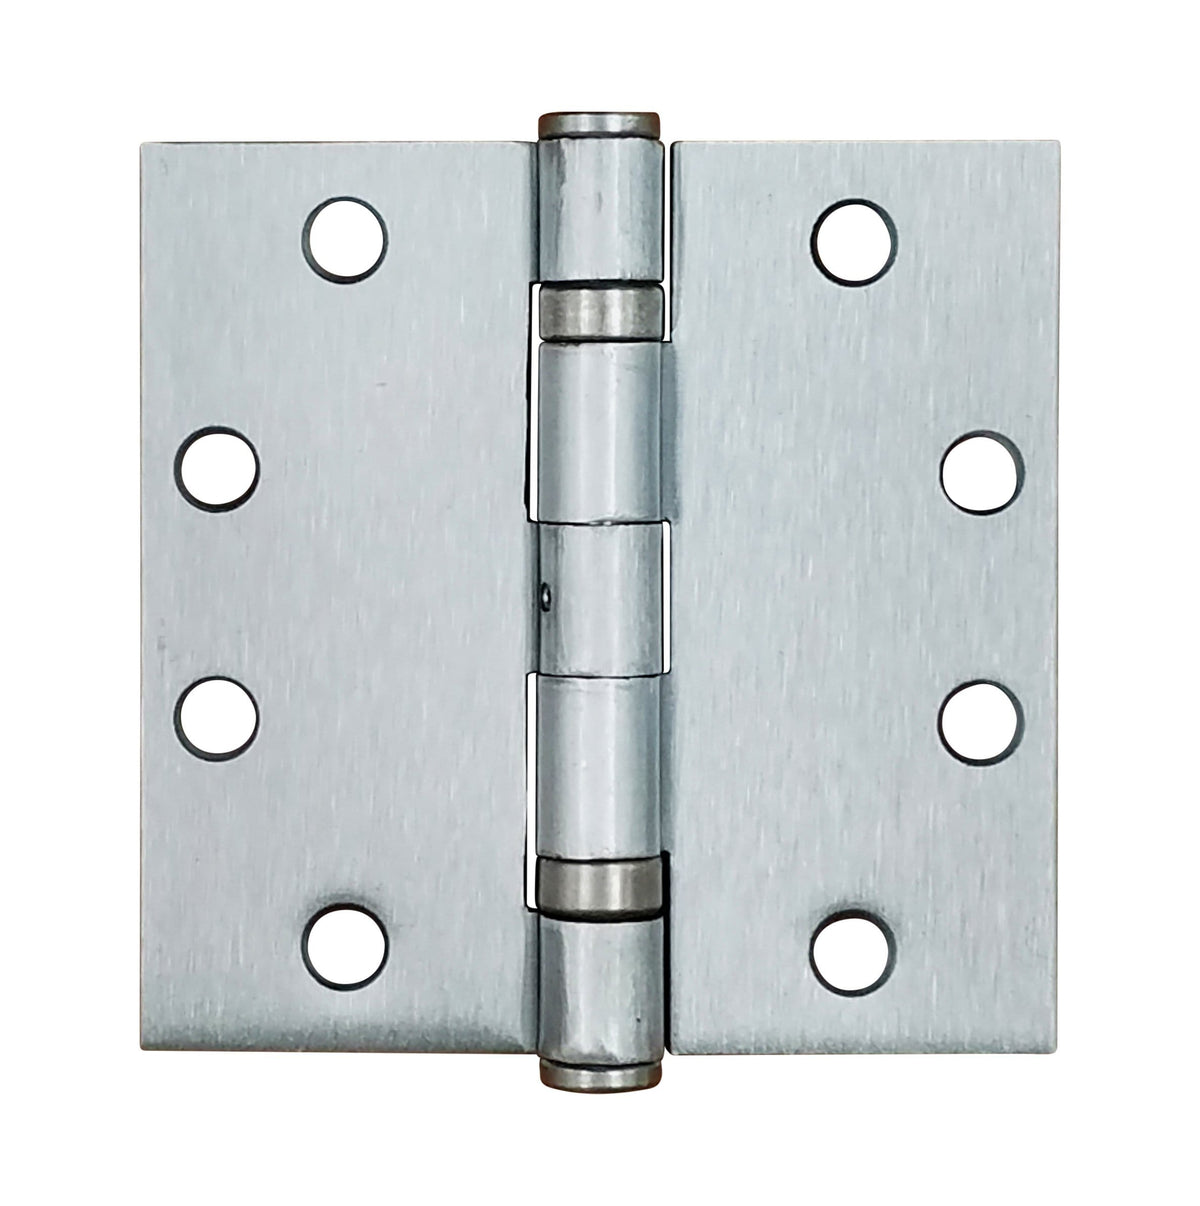 4 1/2" X 4 1/2" With Square Corners Satin Nickel Commercial Ball Bearing Hinge - Sold In Pairs